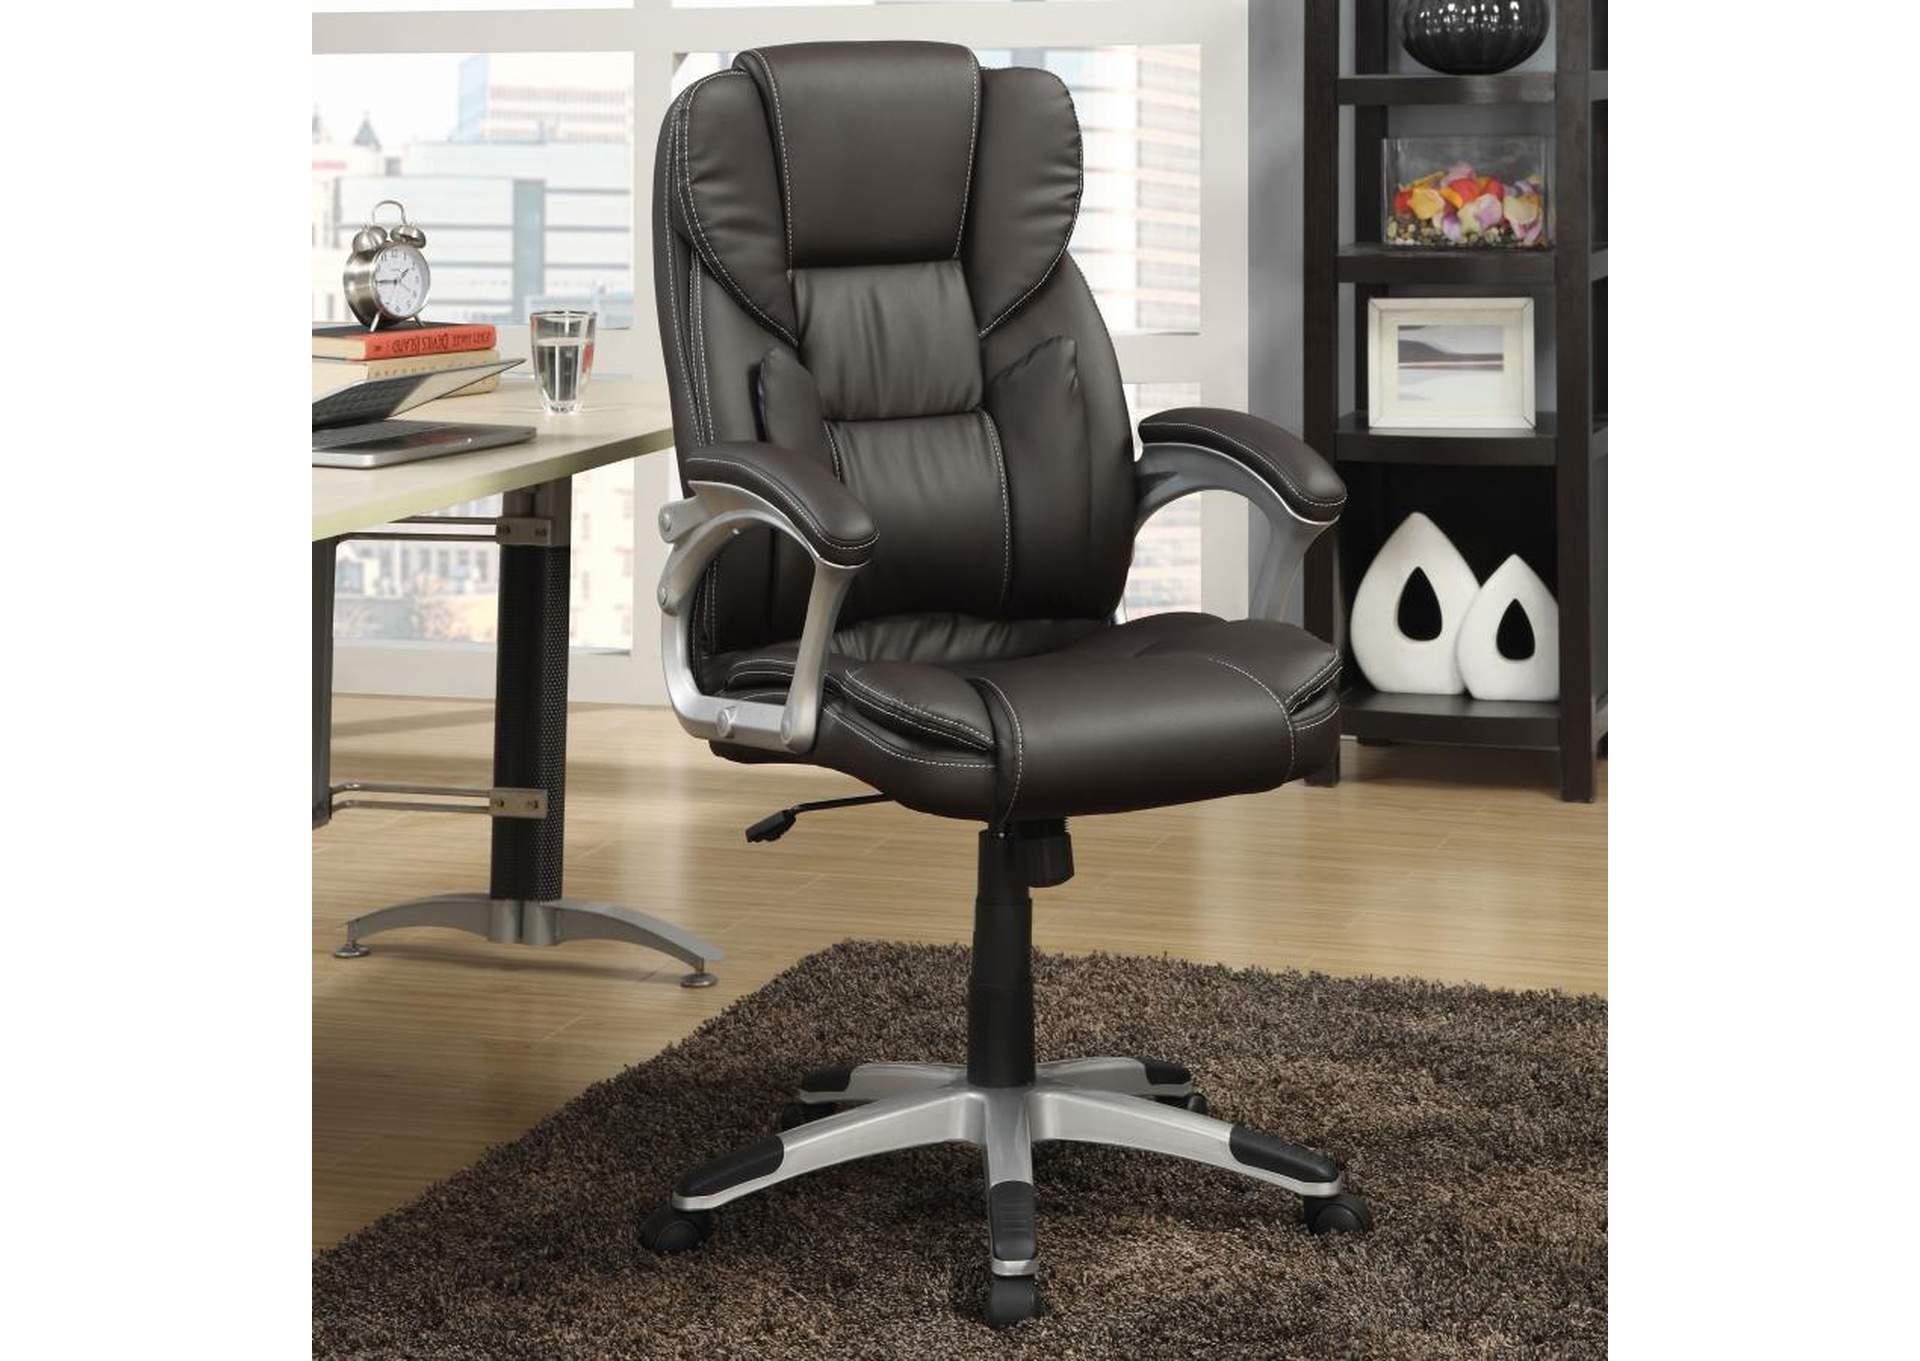 Adjustable Height Office Chair Dark Brown and Silver,Coaster Furniture